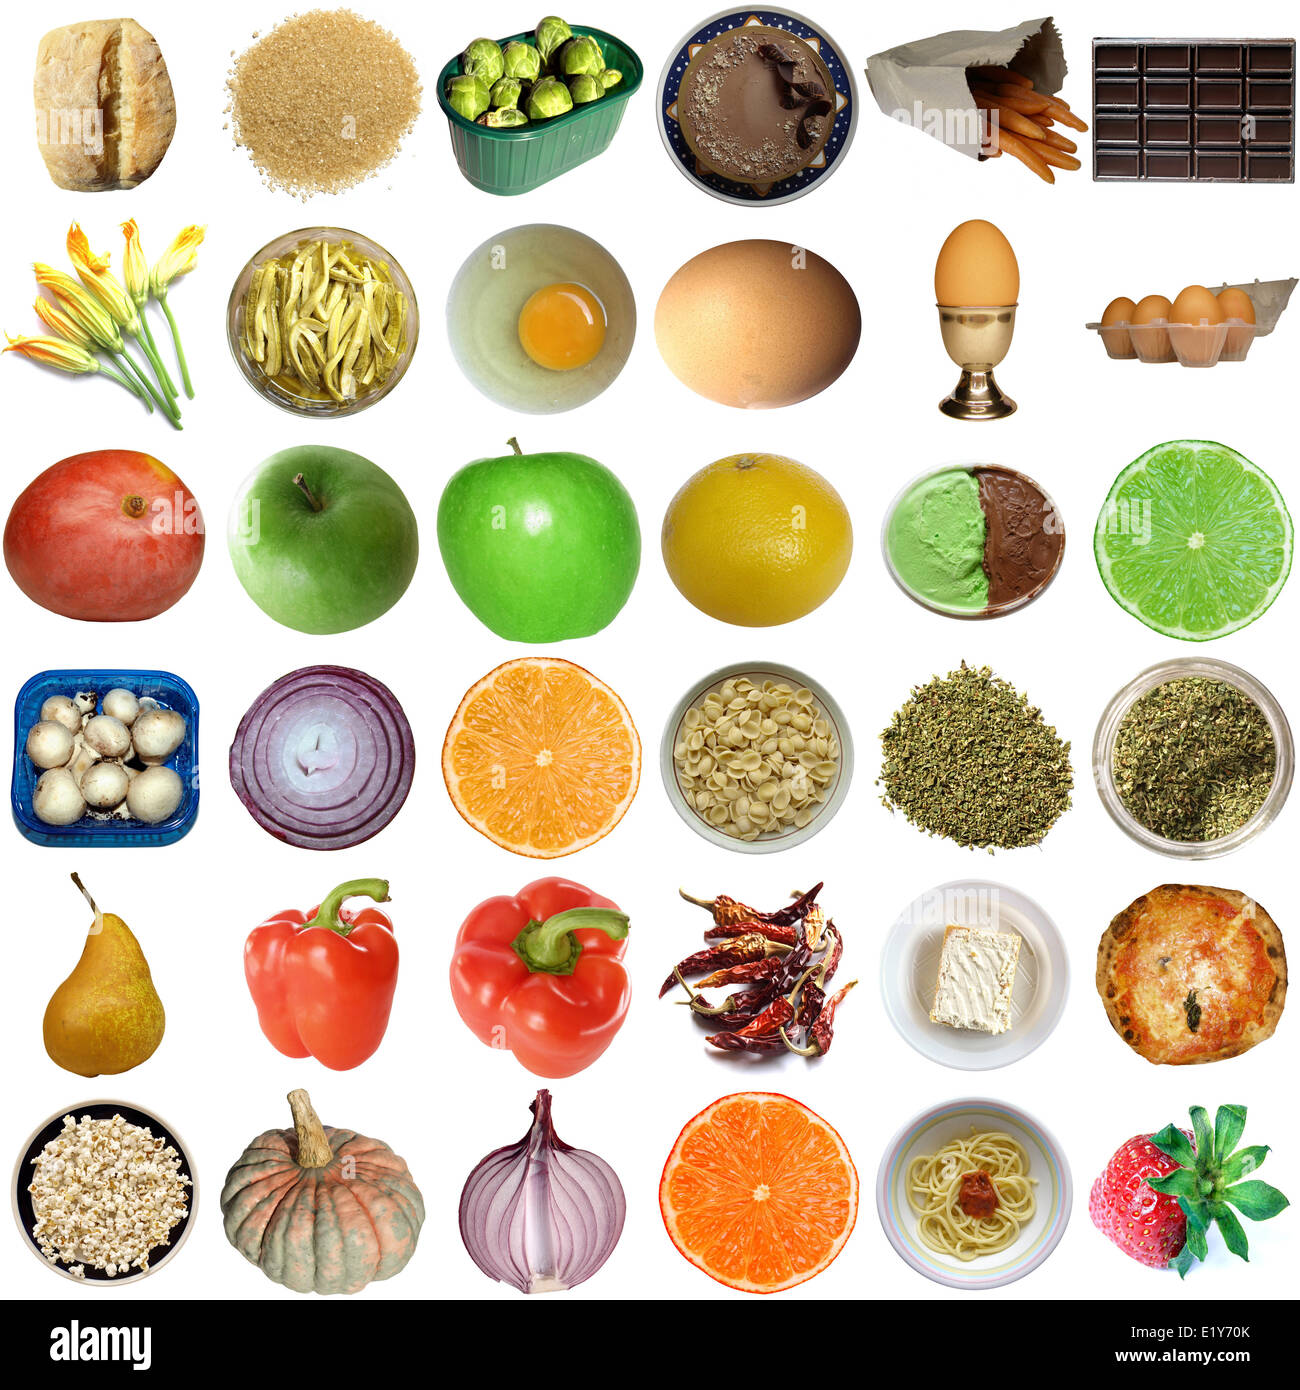 Food collage isolated Stock Photo